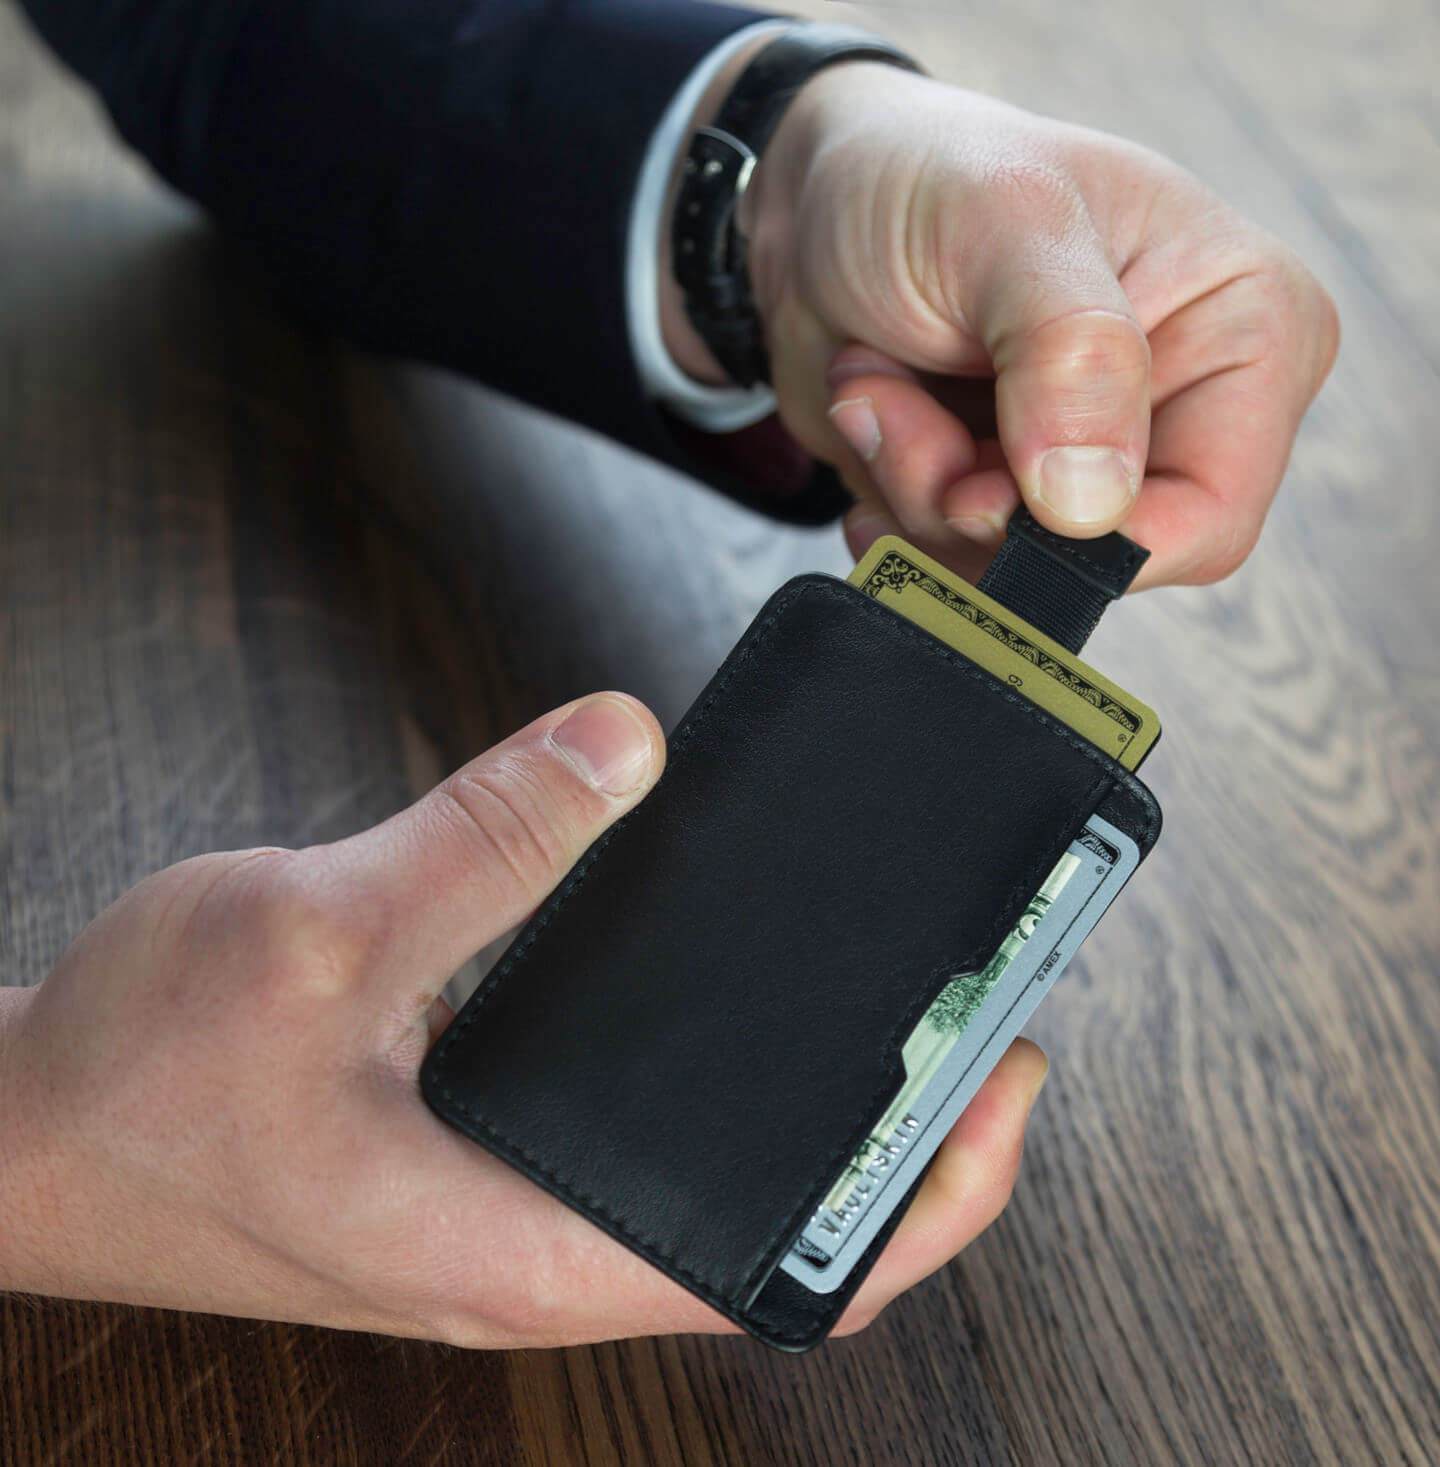 Versatile Chelsea card holder for daily use